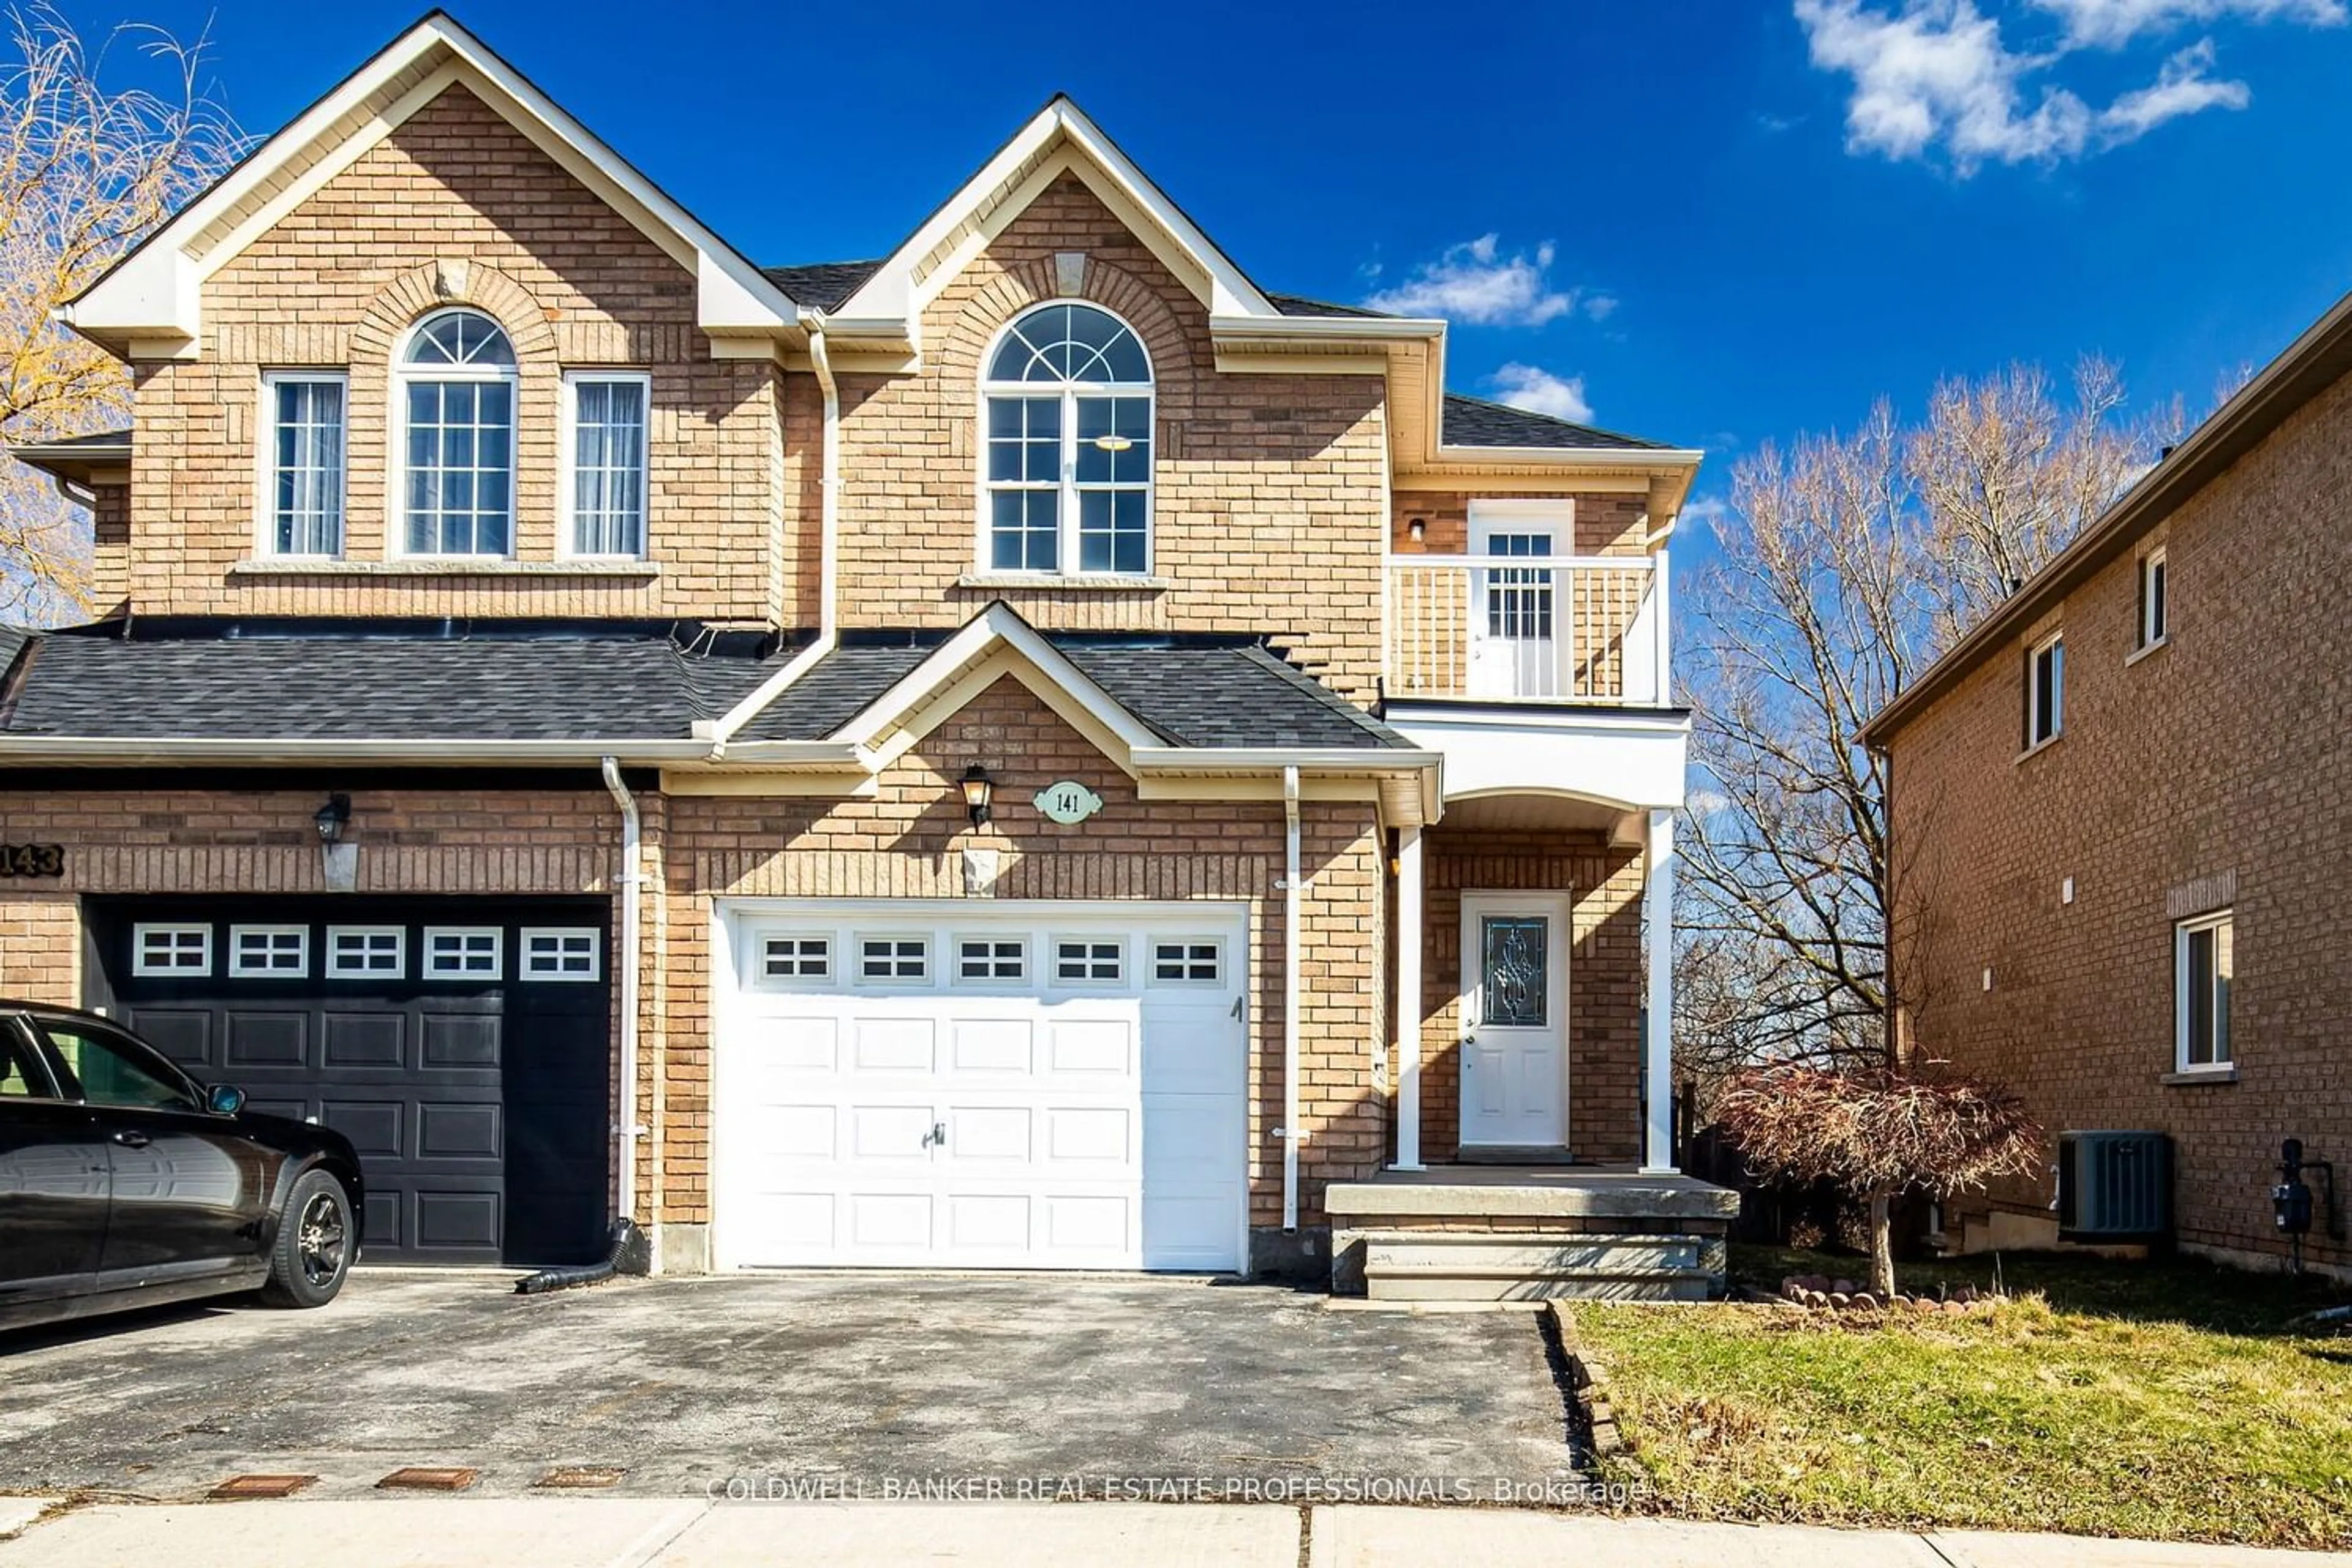 Home with brick exterior material for 141 Maroon Dr, Richmond Hill Ontario L4E 5B7